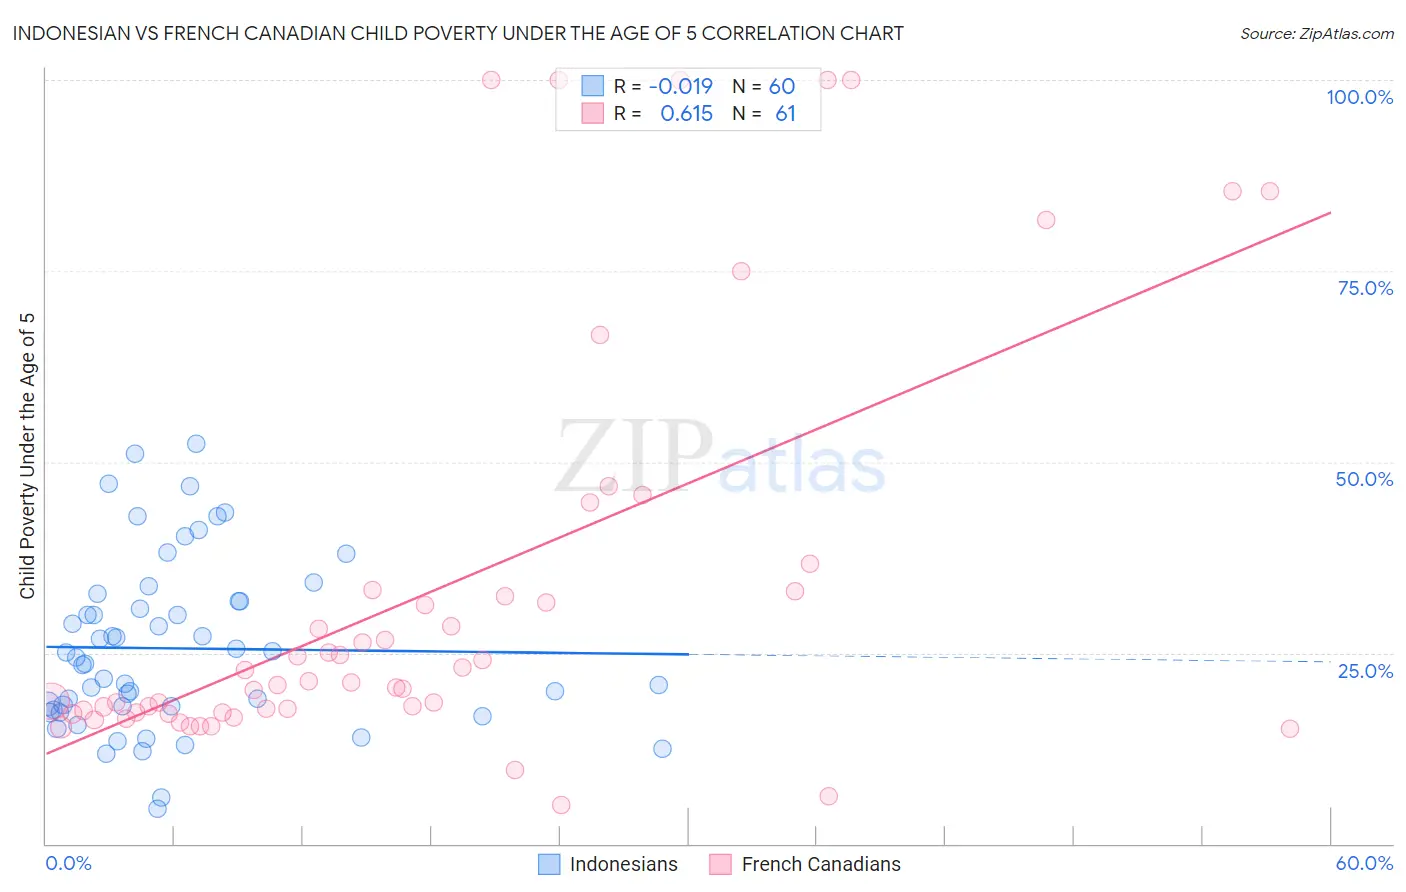 Indonesian vs French Canadian Child Poverty Under the Age of 5